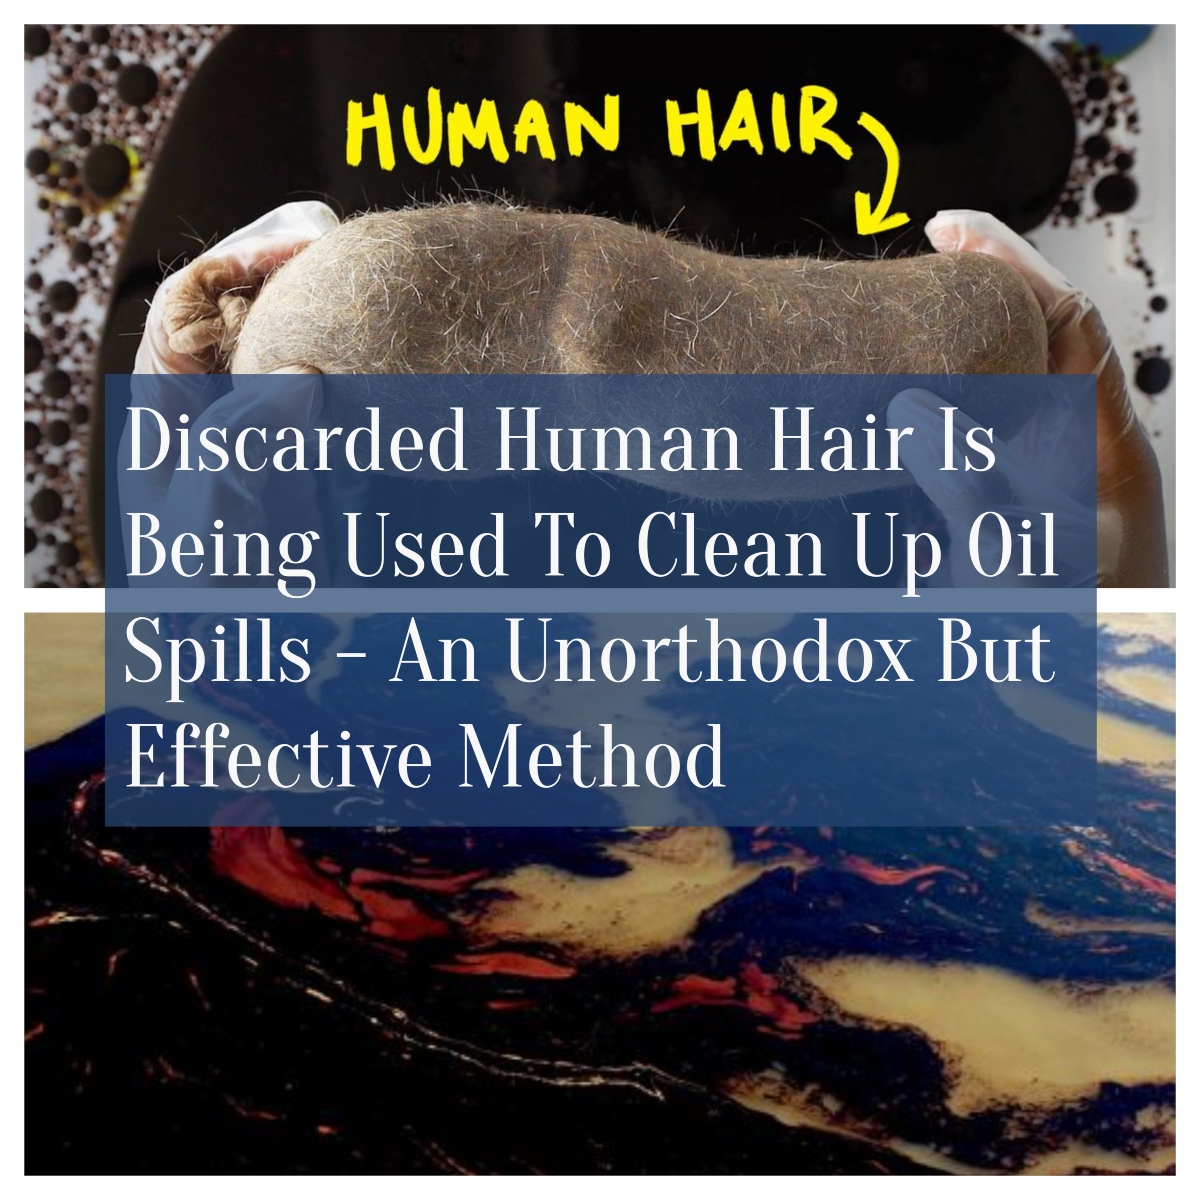 Discarded Human Hair Is Being Used To Clean Up Oil Spills - An Unorthodox But Effective Method